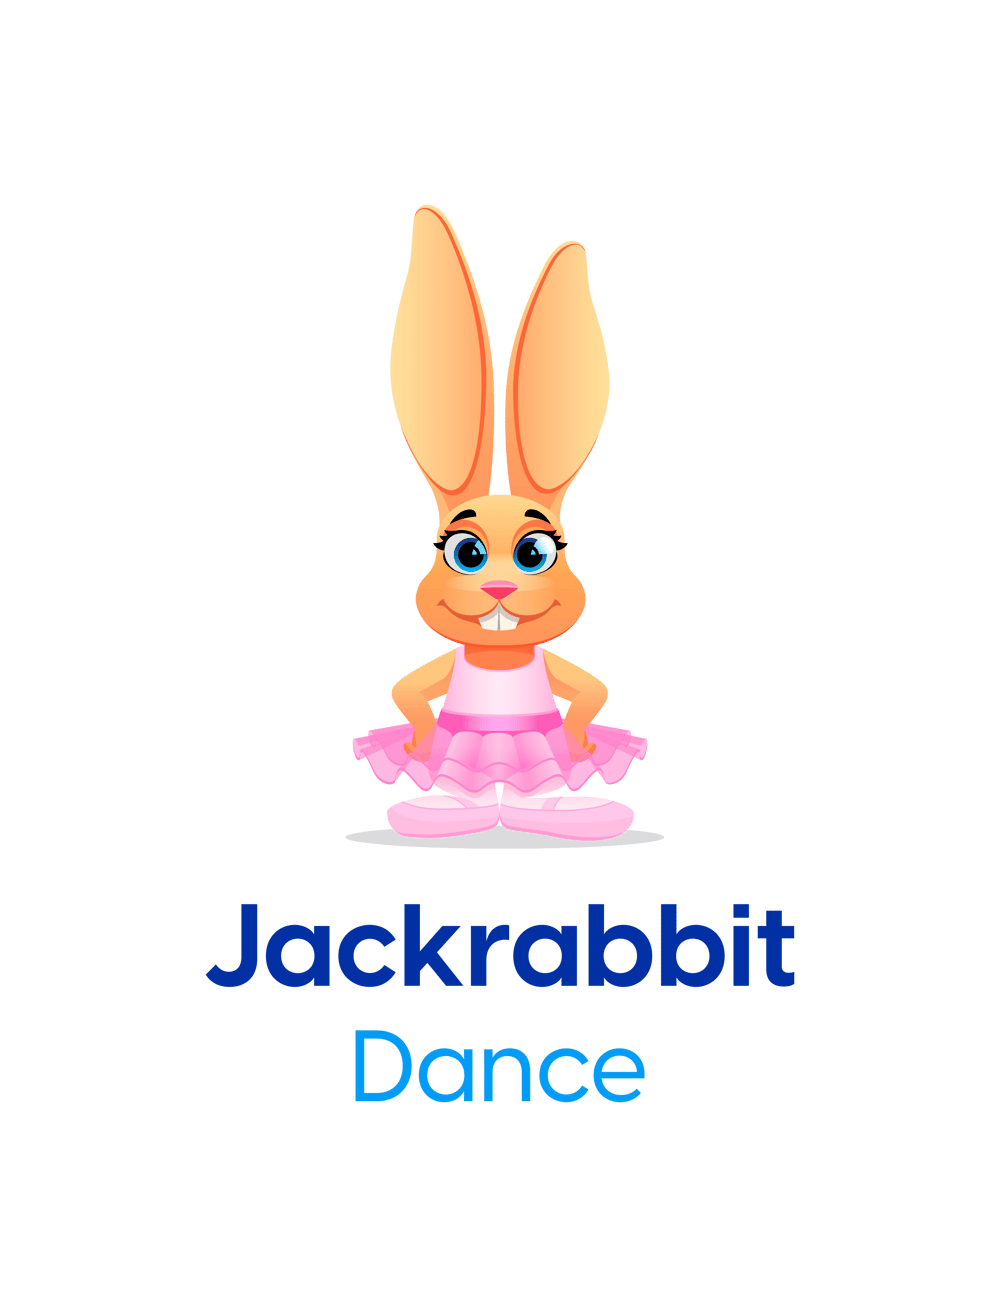 Register your child on our Jackrabbit web page for classes at Absolute Dance Center, Monroe Twp NJ,dance classes, children, activity, local